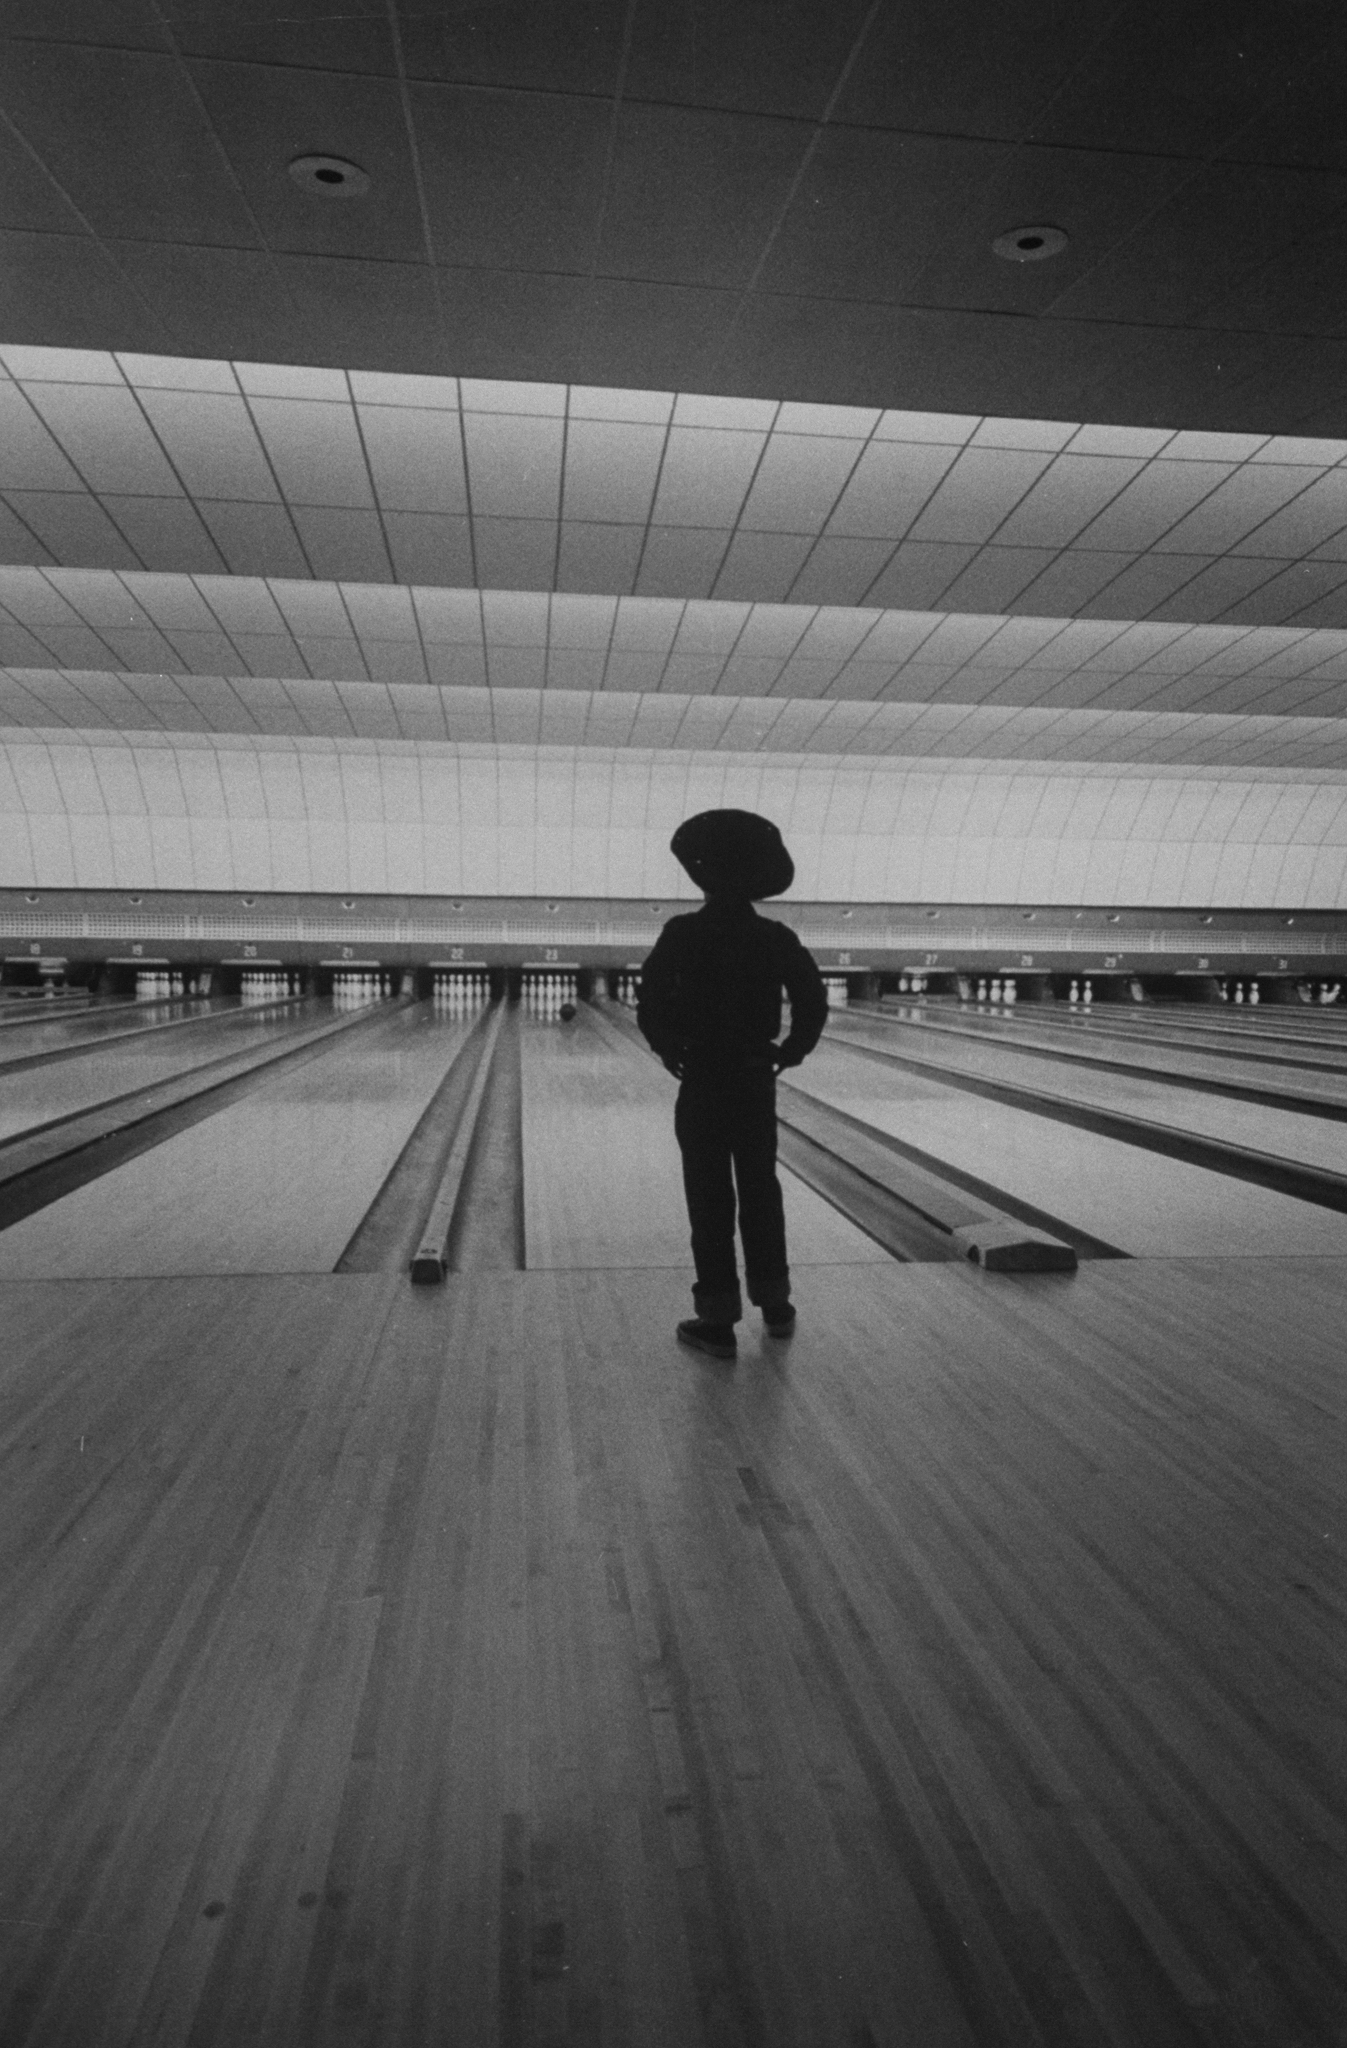 A bowler watches his ball approach the pins.